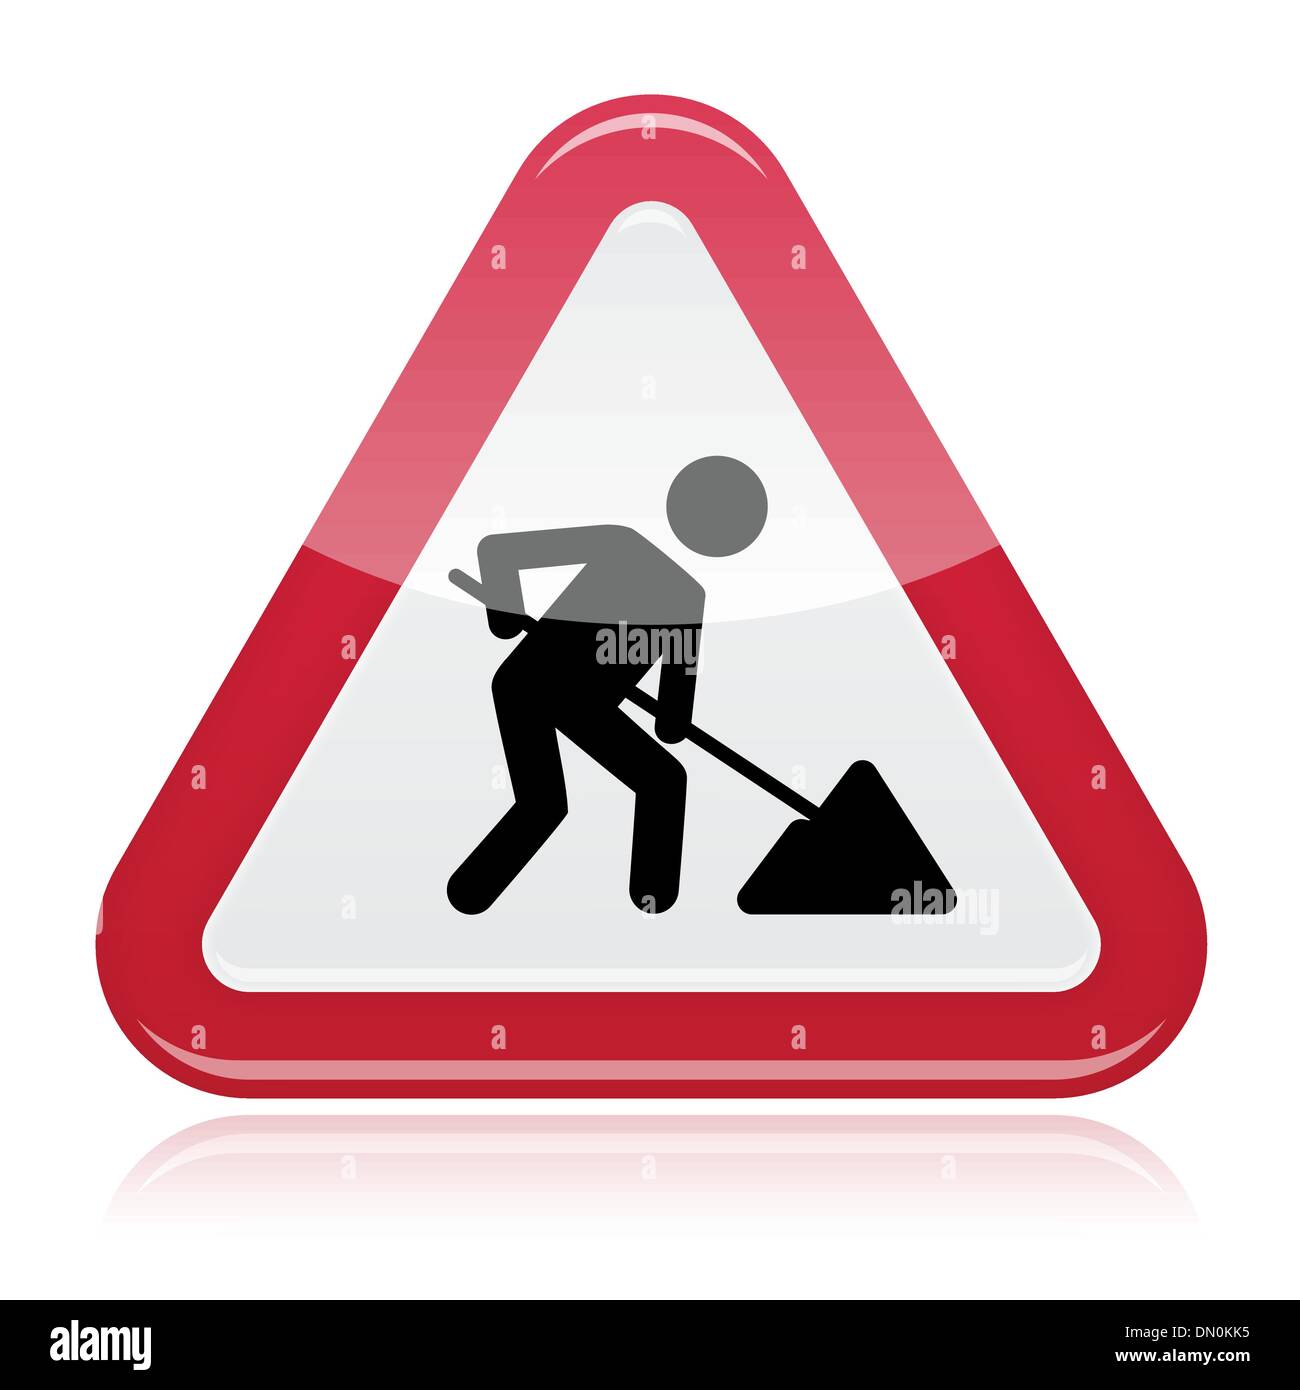 Under construction, road works warning sign Stock Vector